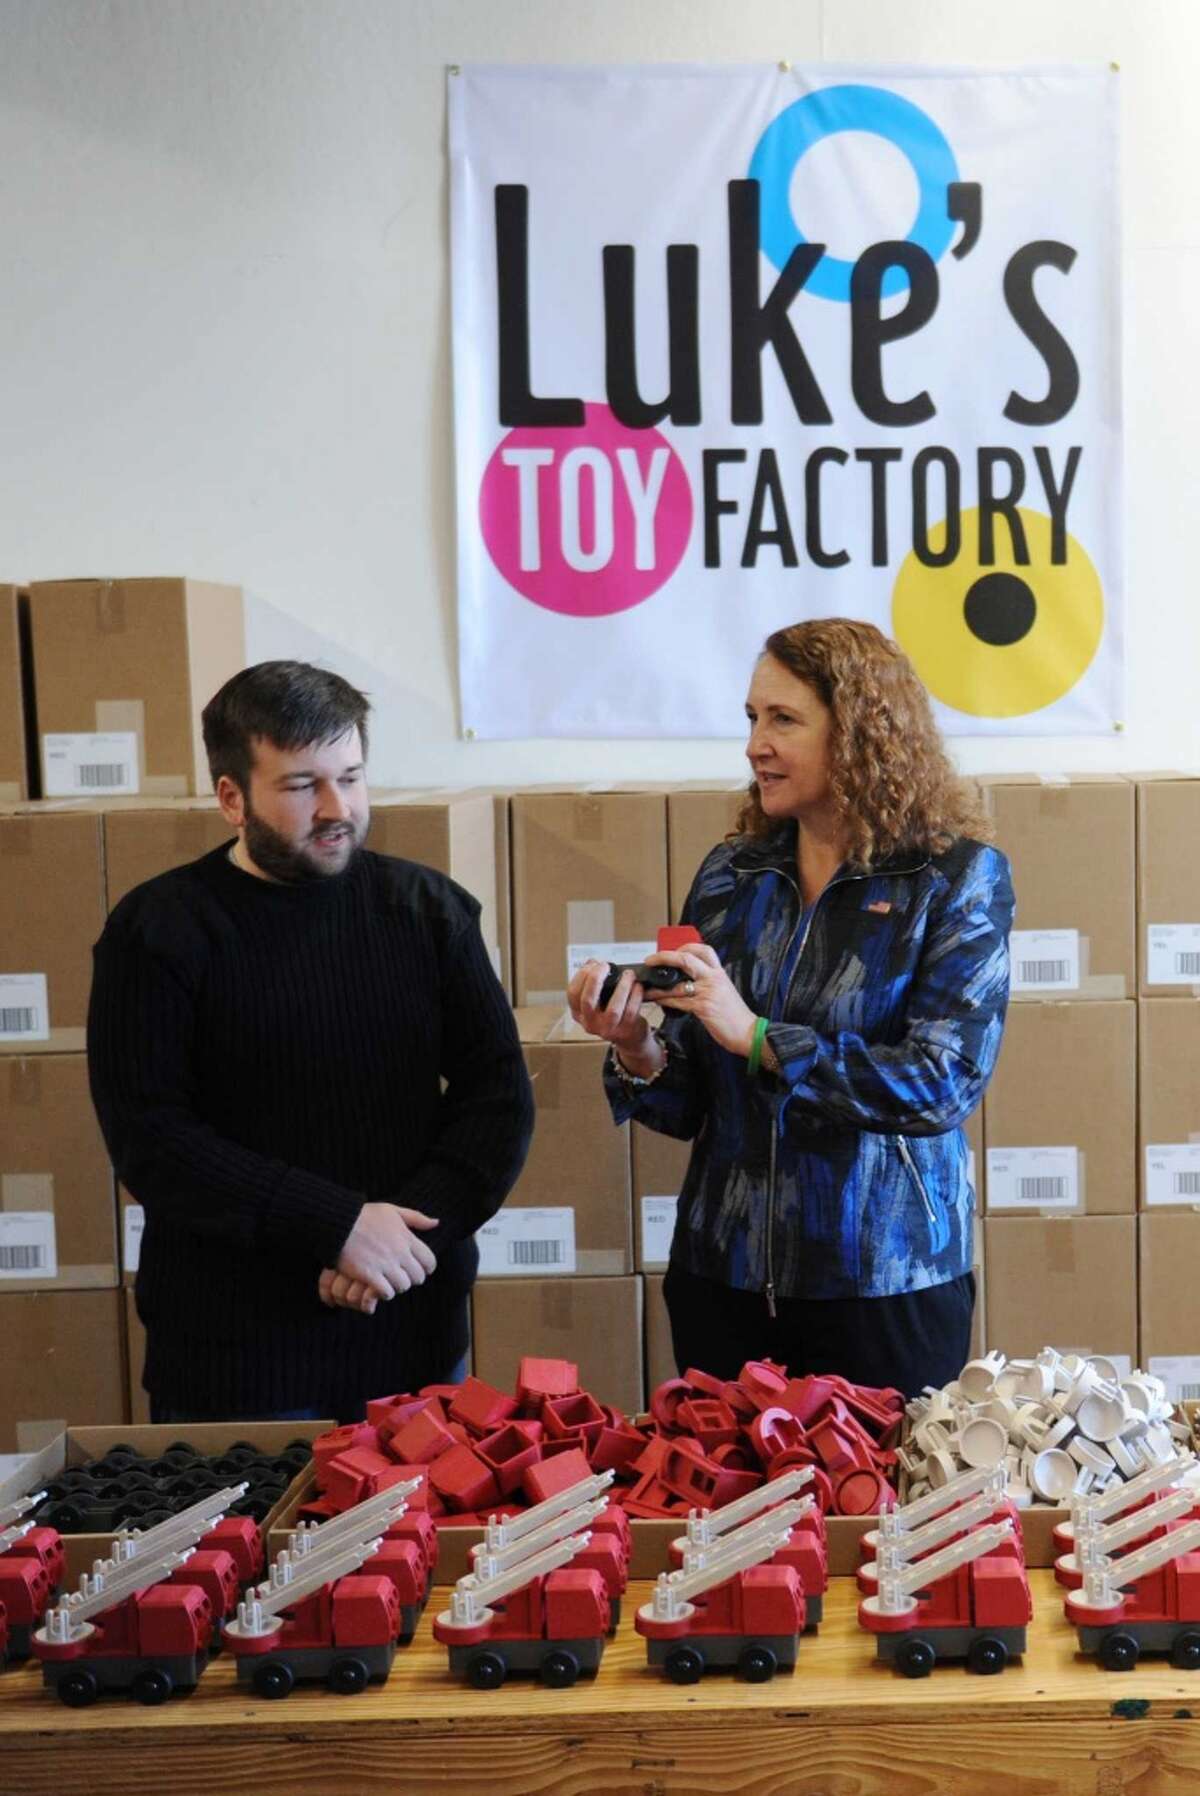 Hours of pleasure are in store for kids who get a truck from Luke’s Toy Factory in Danbury. The fire trucks, dump trucks and cargo trucks are all made smartly and sustainably from quality materials that can take a pounding – and all are certified safe.